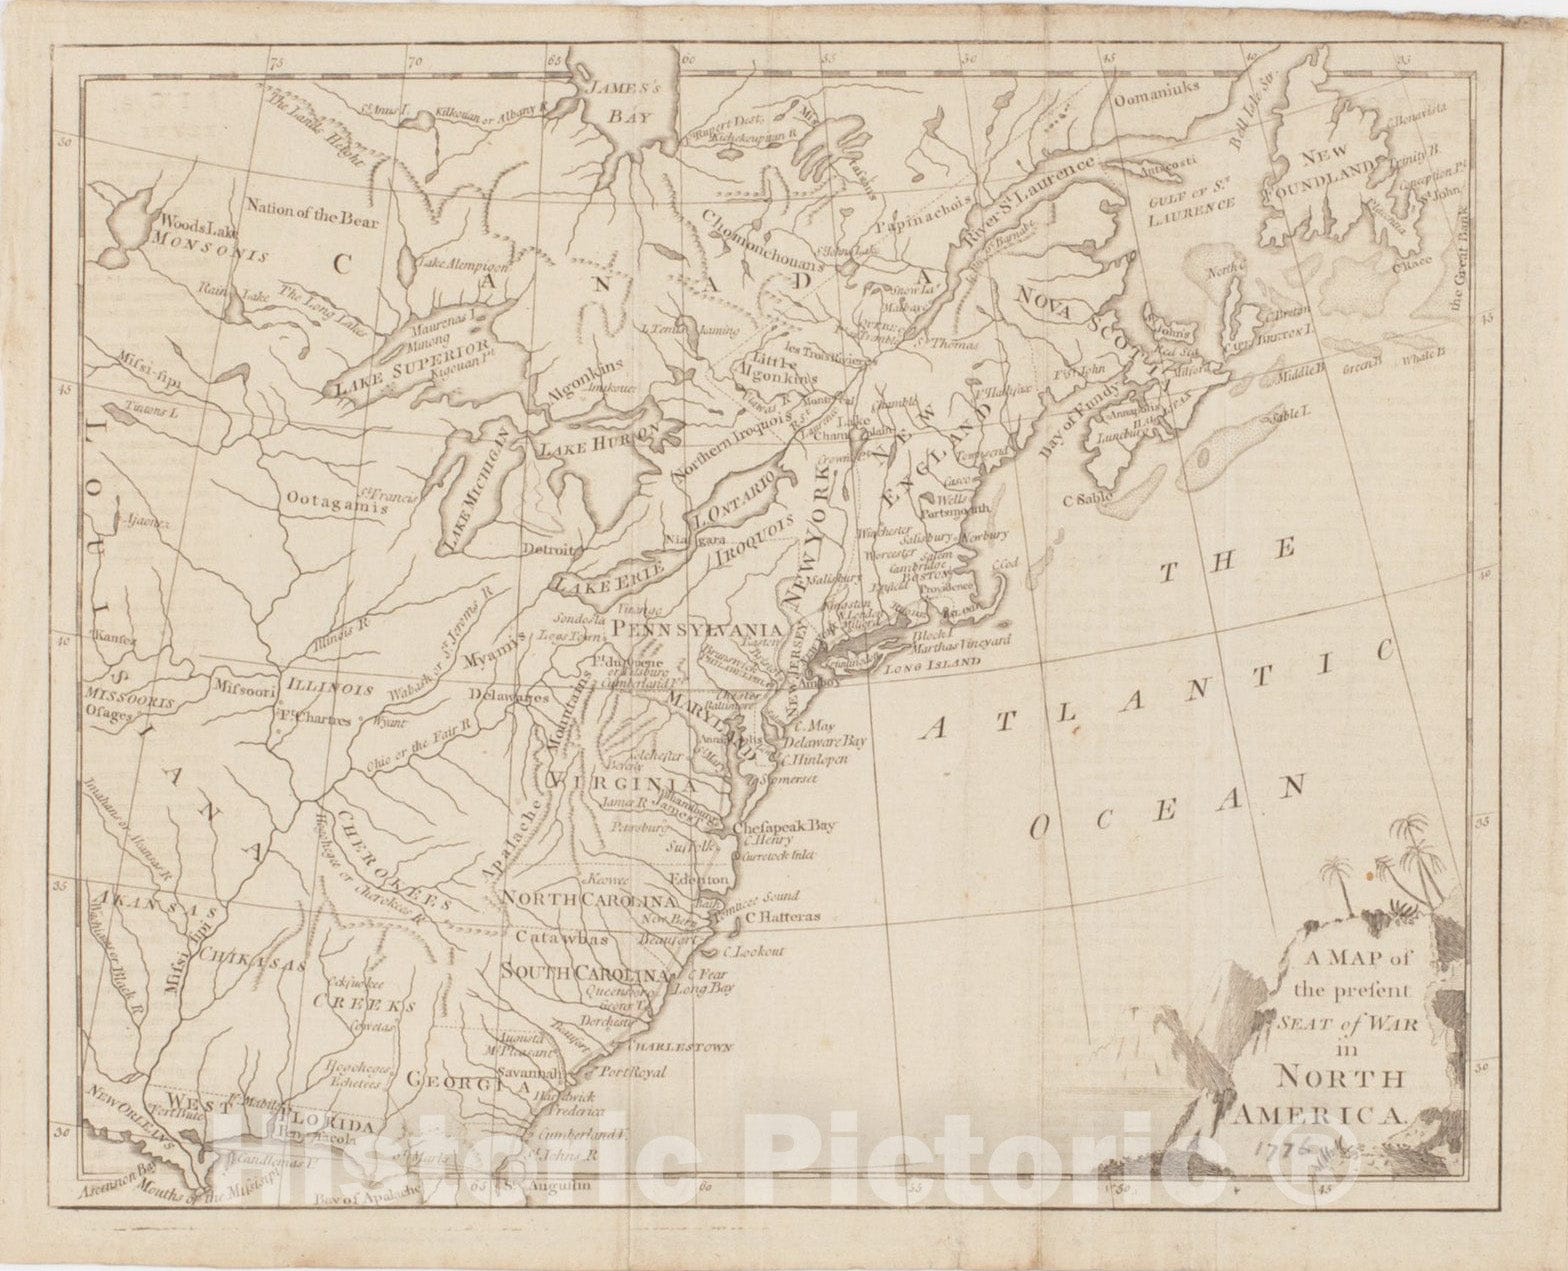 Historical Map, 1776 A Map of The Present seat of war in North America, Vintage Wall Art